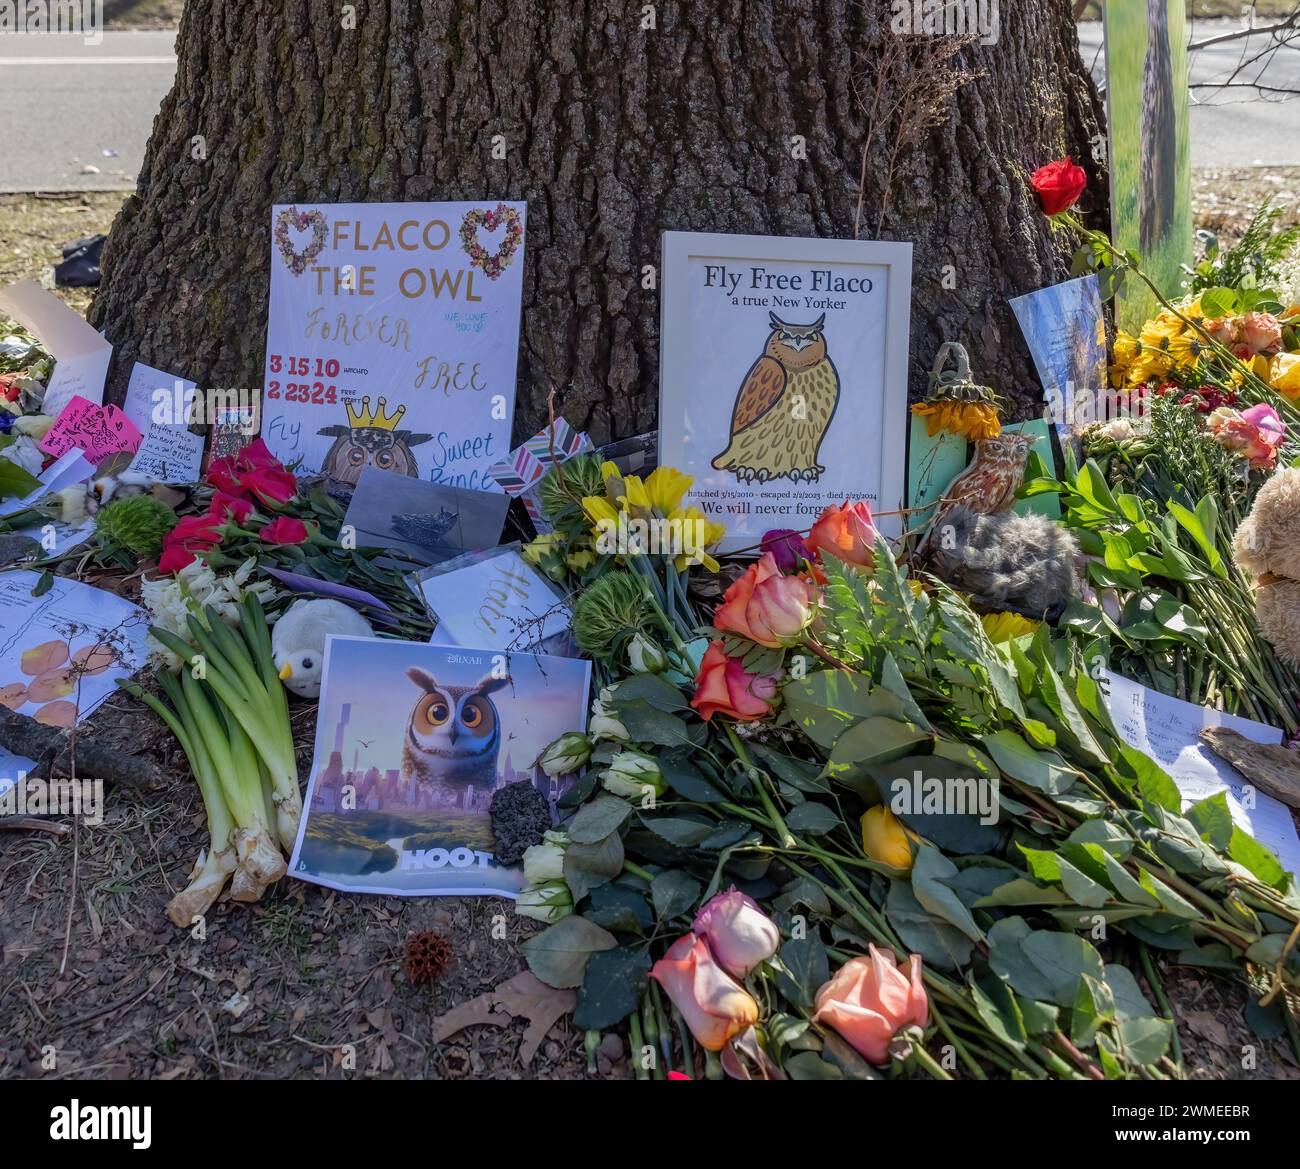 NEW YORK, N.Y. – February 25, 2024: Tributes to Flaco the owl are seen at a makeshift memorial in Central Park. Stock Photo